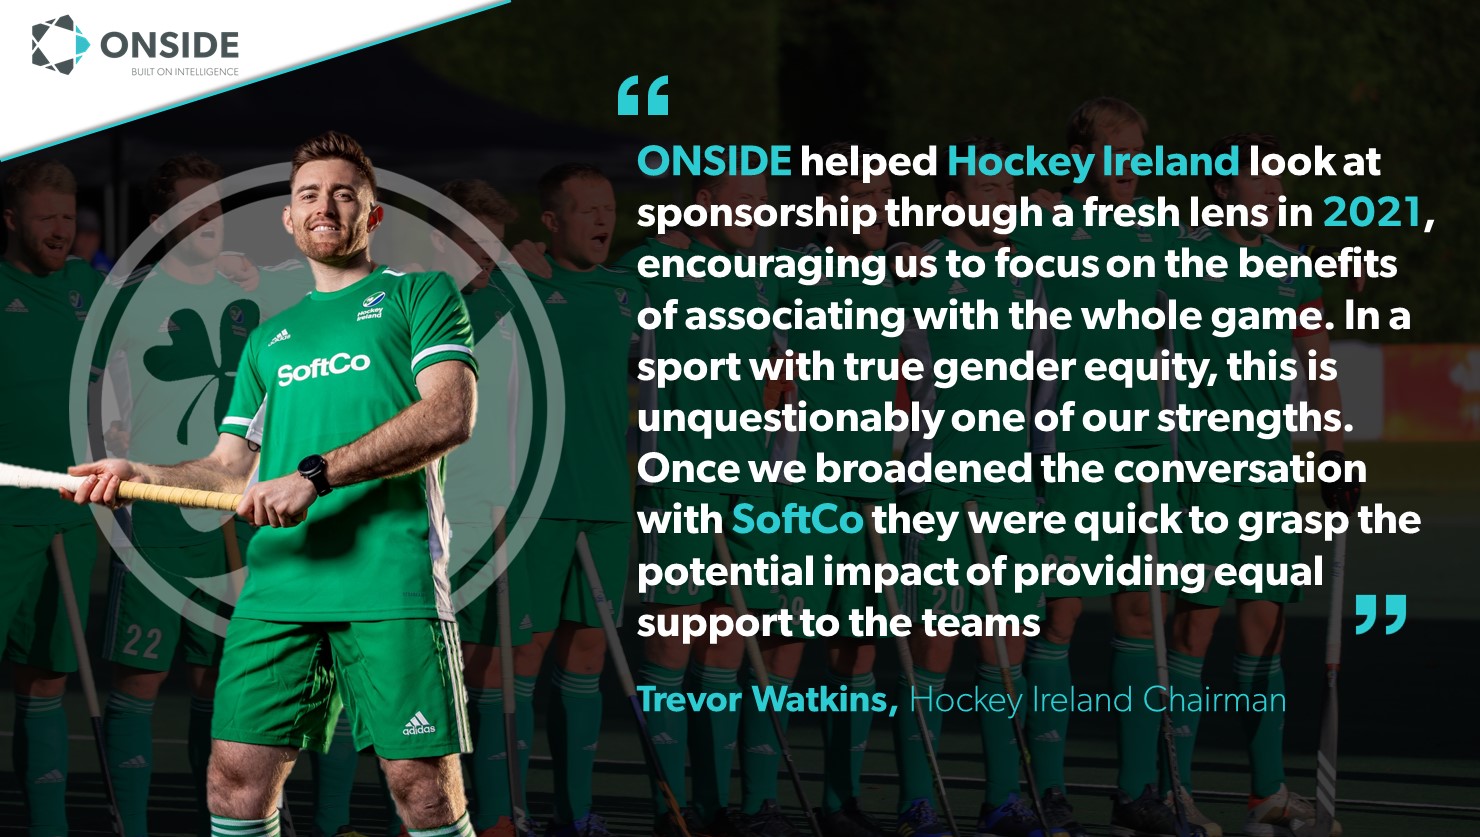 vod Ga naar beneden mechanisch ONSIDE on Twitter: "ONSIDE is delighted to have supported Hockey Ireland  through the successful expansion of its partnership with SoftCo to the  men's team. They will now support the women's and men's